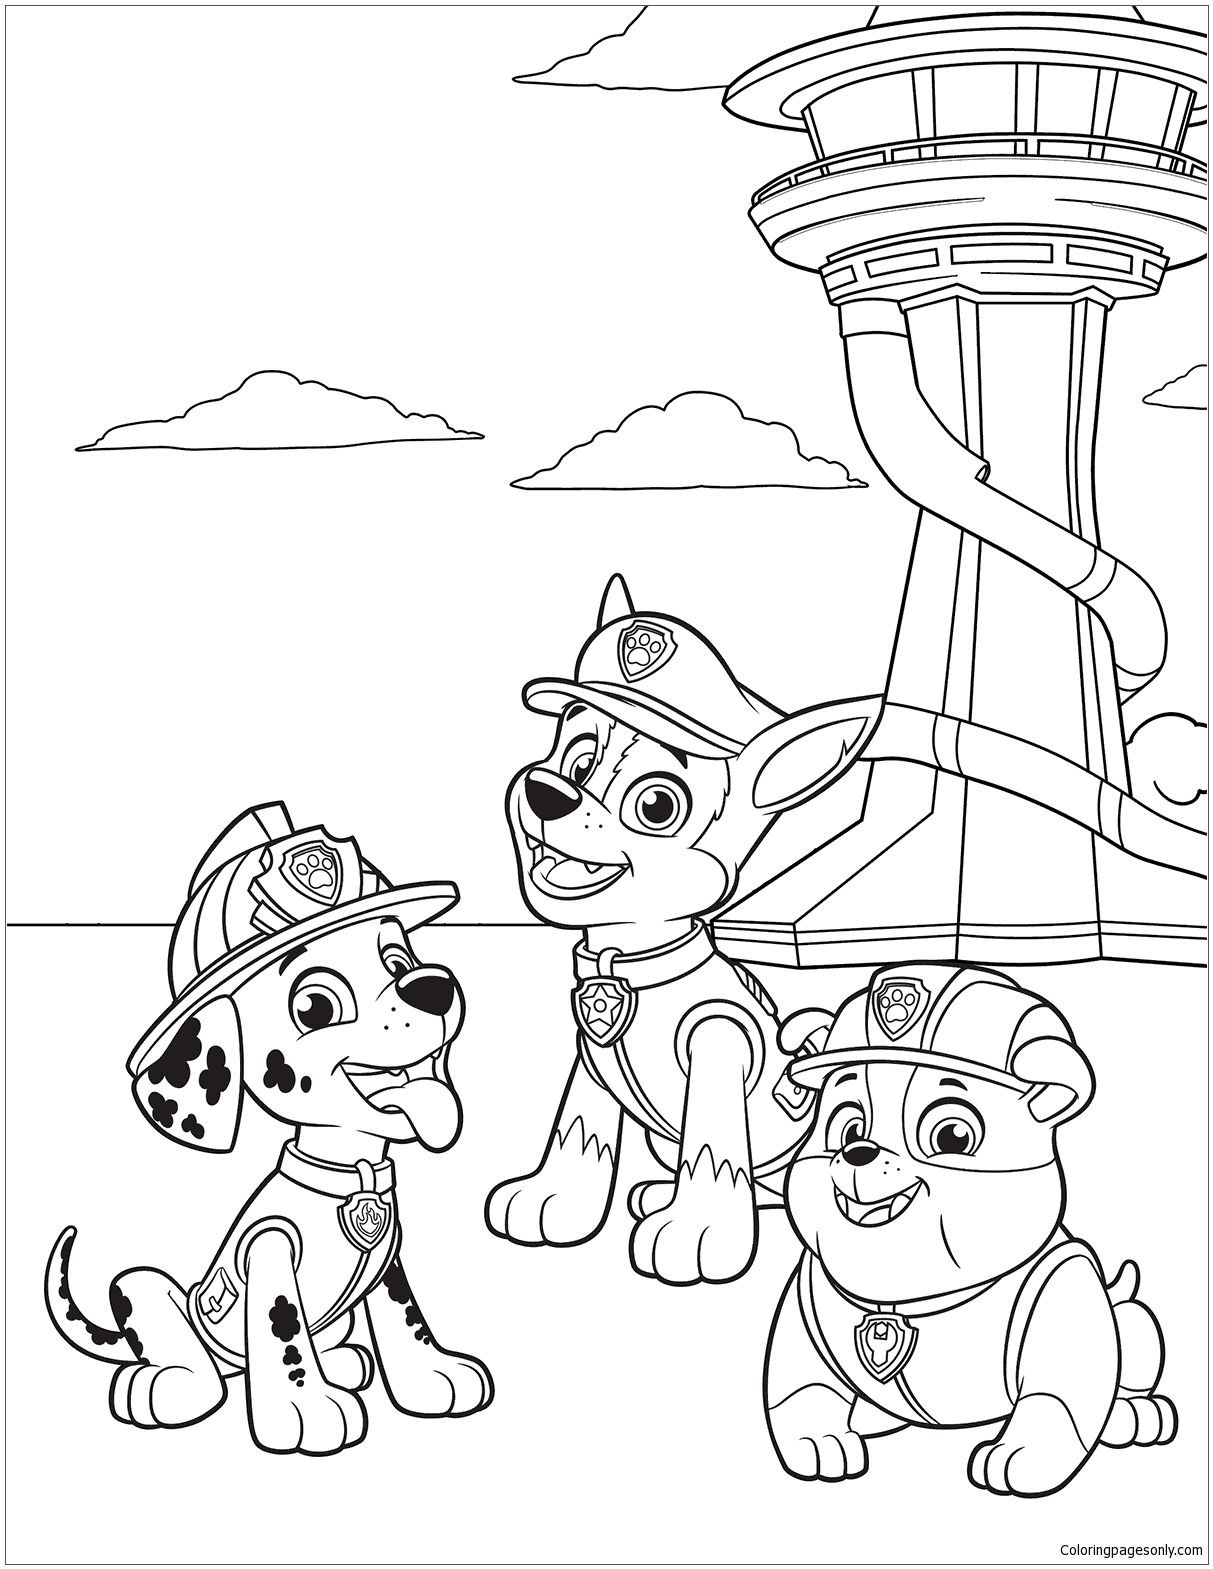 Coloring Pages For Kids Paw Patrol
 Paw Patrol 38 Coloring Page